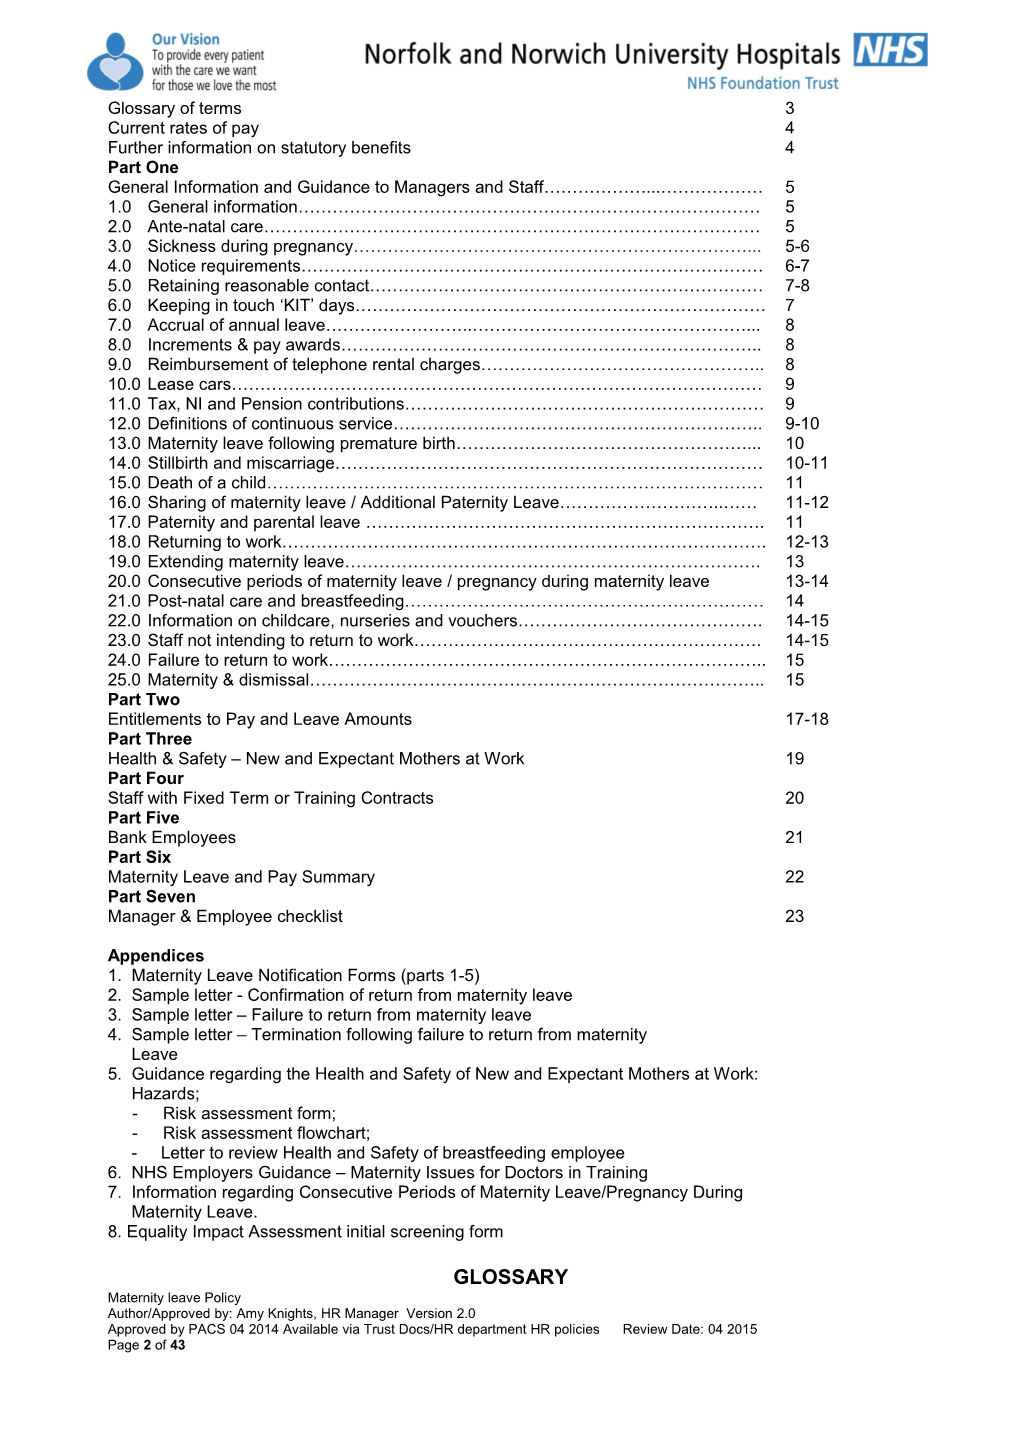 Summary of Abbreviations and Terminology Used in This Document and Associated Documents